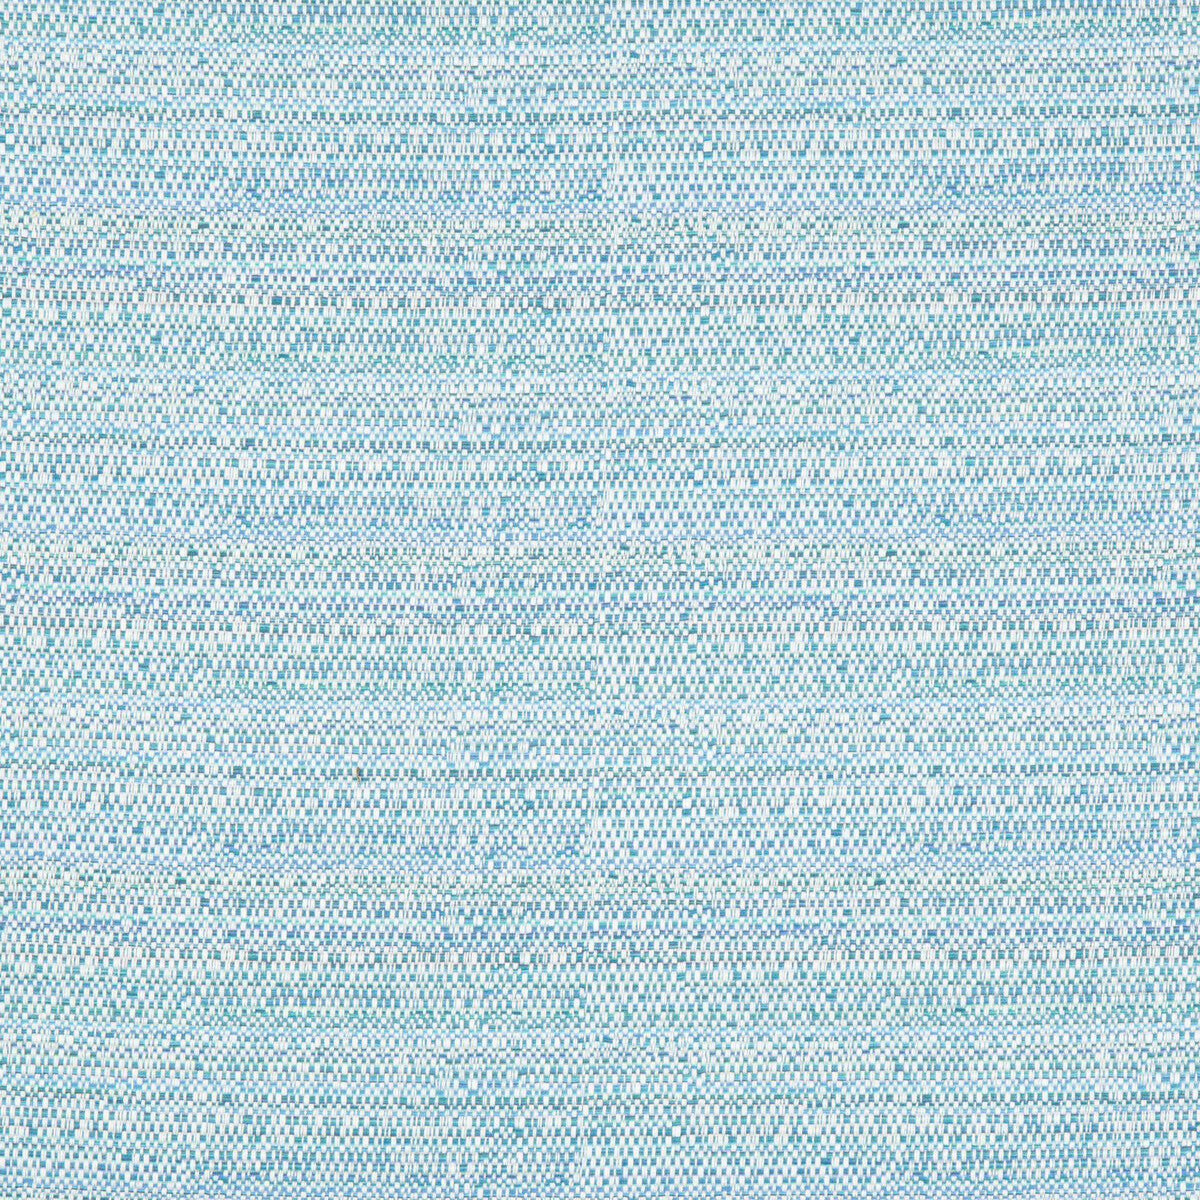 Melanger fabric in peacock color - pattern 31695.13.0 - by Kravet Couture in the Echo Indoor Outdoor Ibiza collection